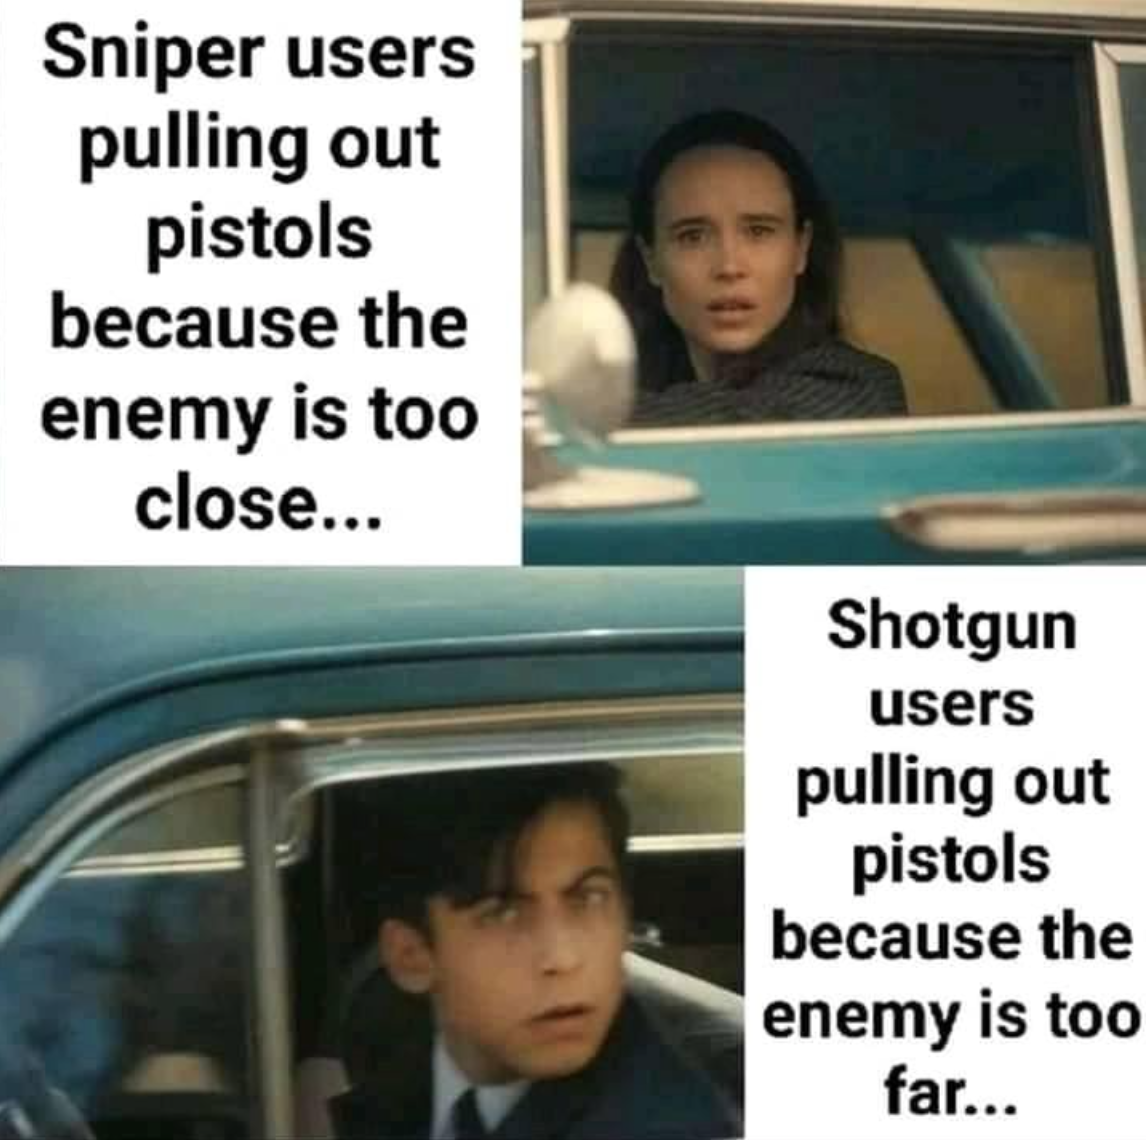 funny gaming memes  - sniper users pulling out pistols because enemy - Sniper users pulling out pistols because the enemy is too close... Shotgun users pulling out pistols because the enemy is too far...